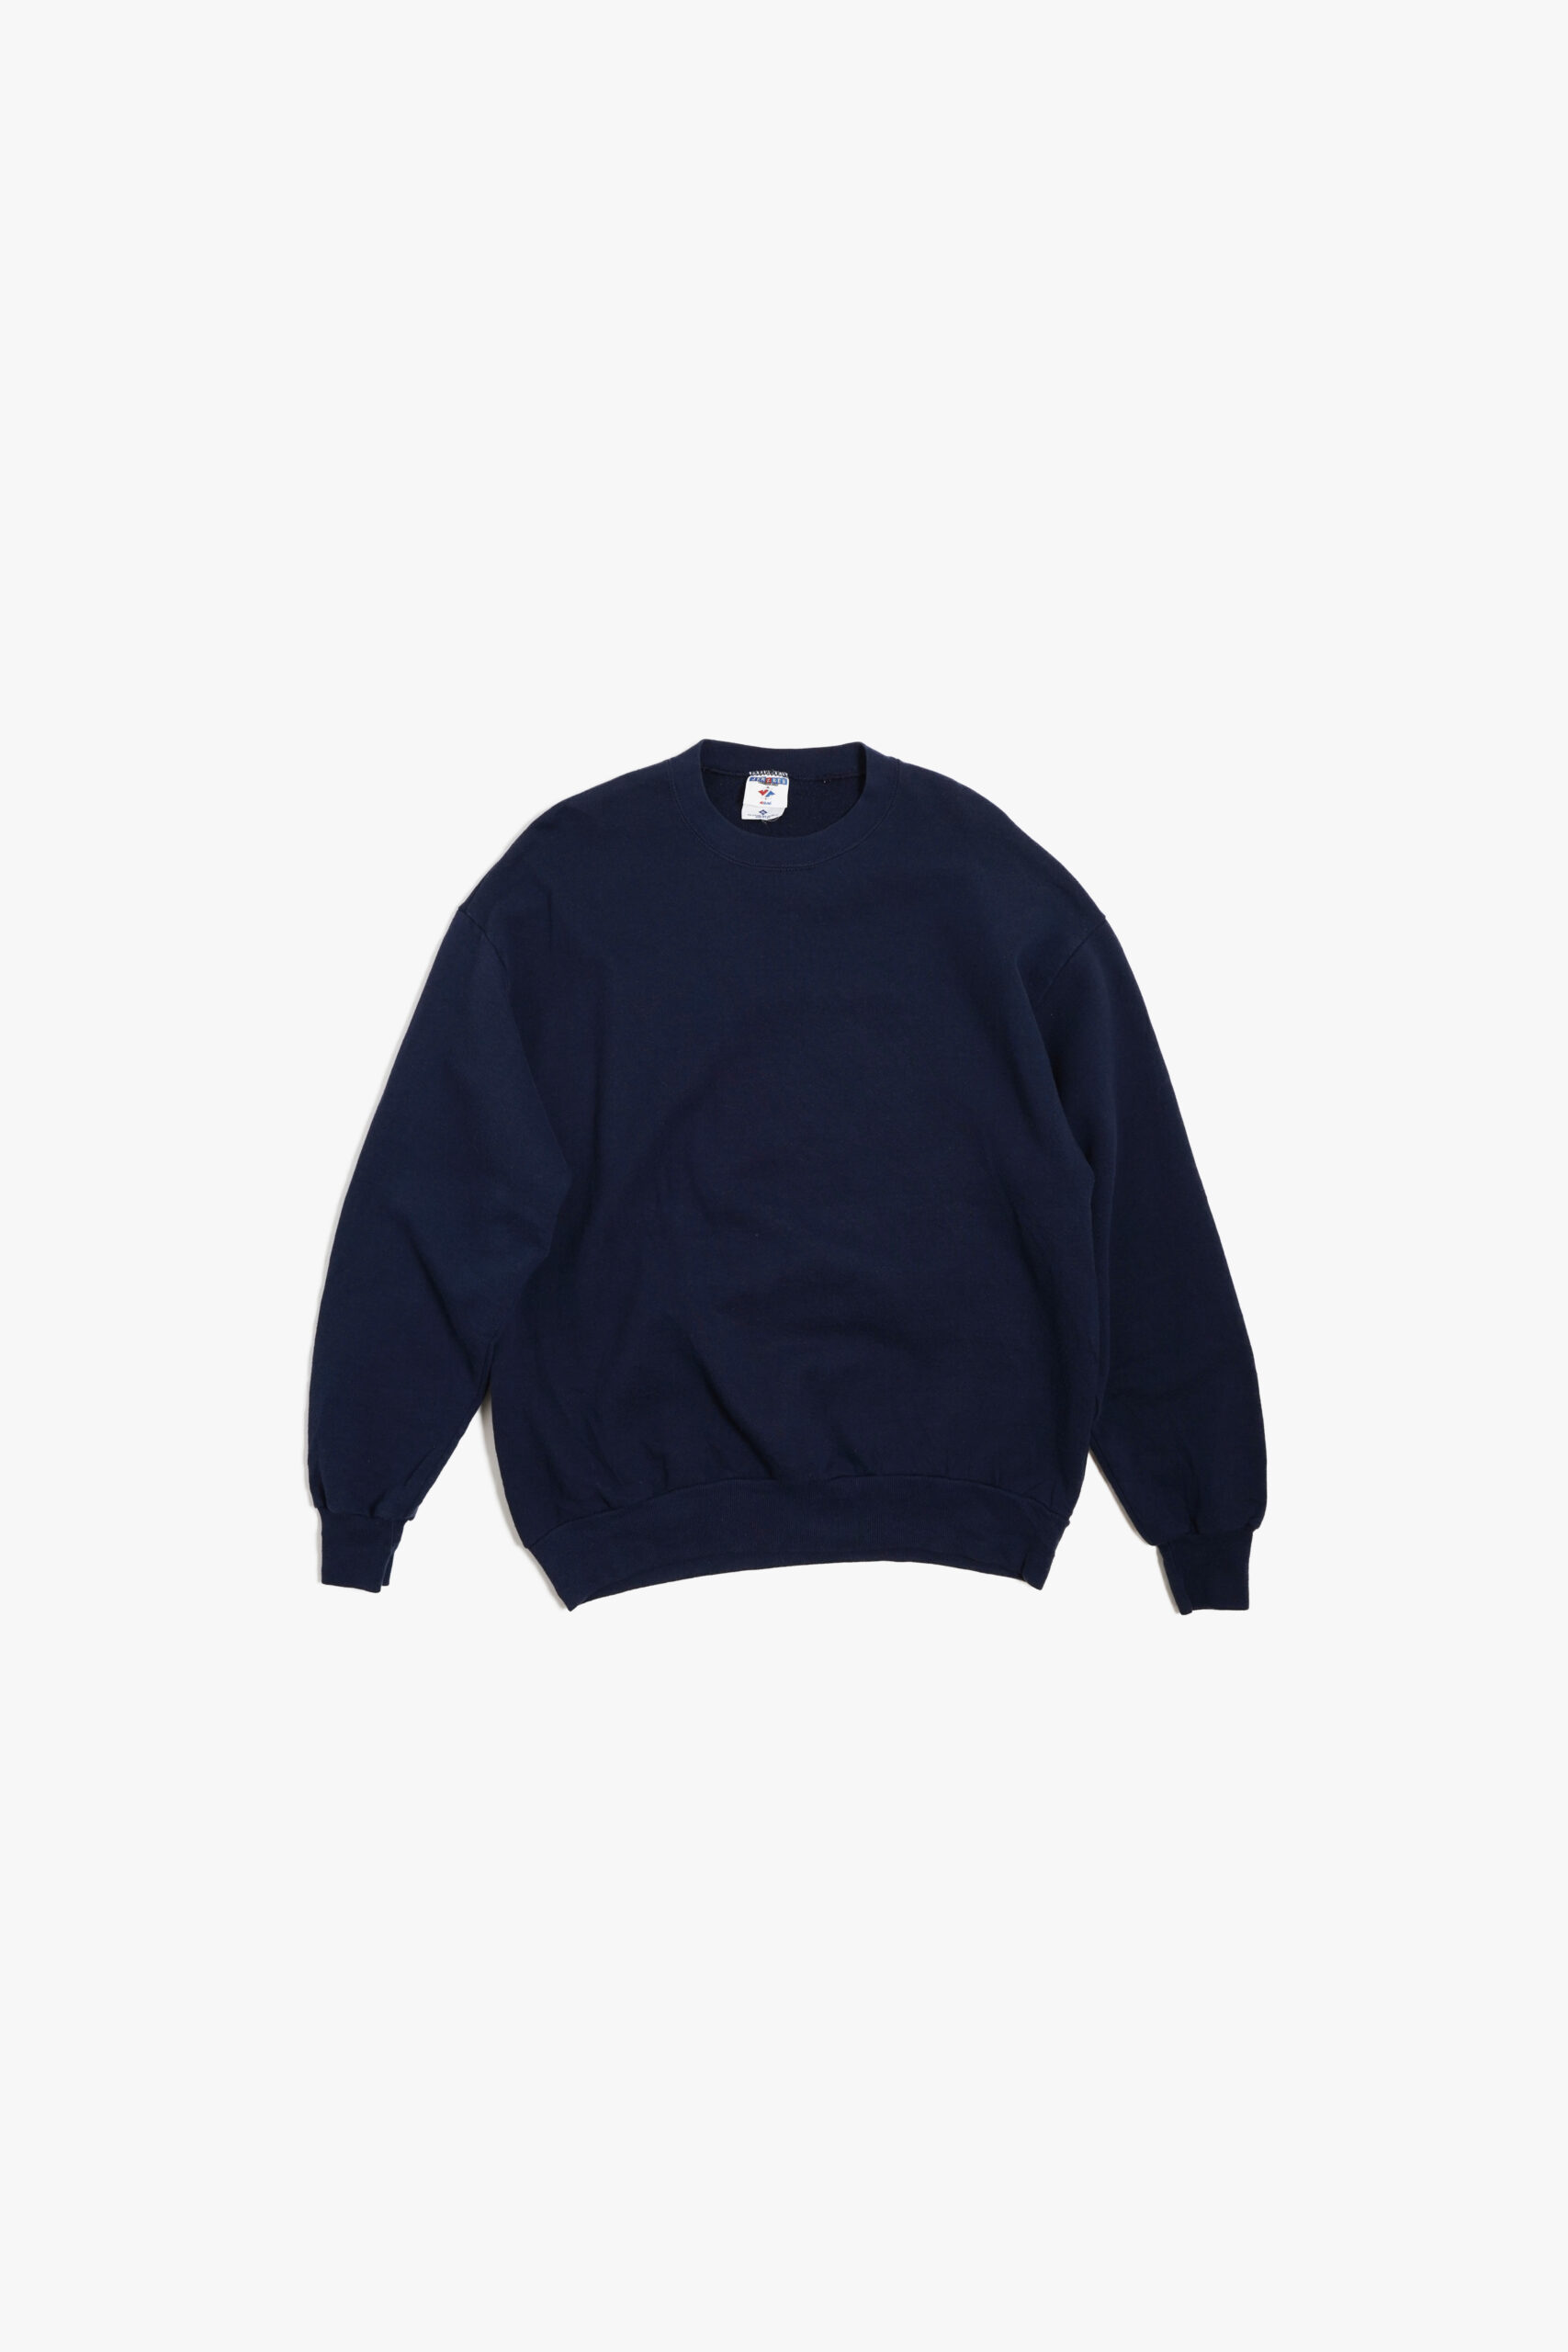 JERZEES SWEAT NAVY COLOR MADE IN USA